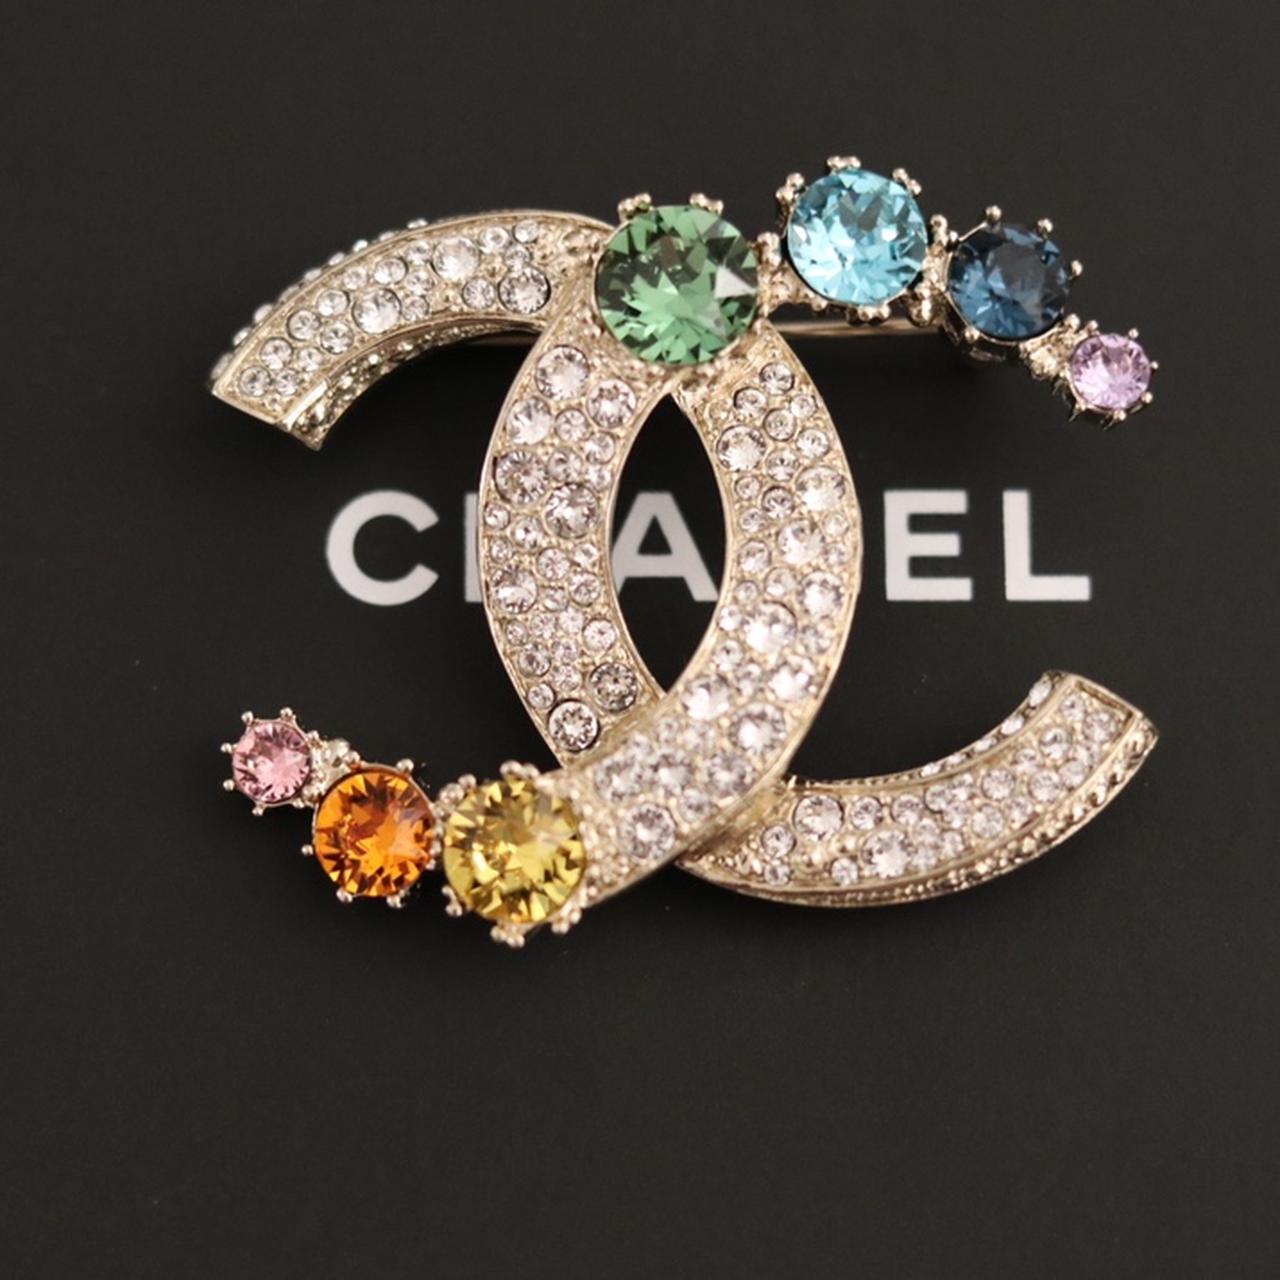 Chanel brooch , Used once , #chanel #cc #luxury